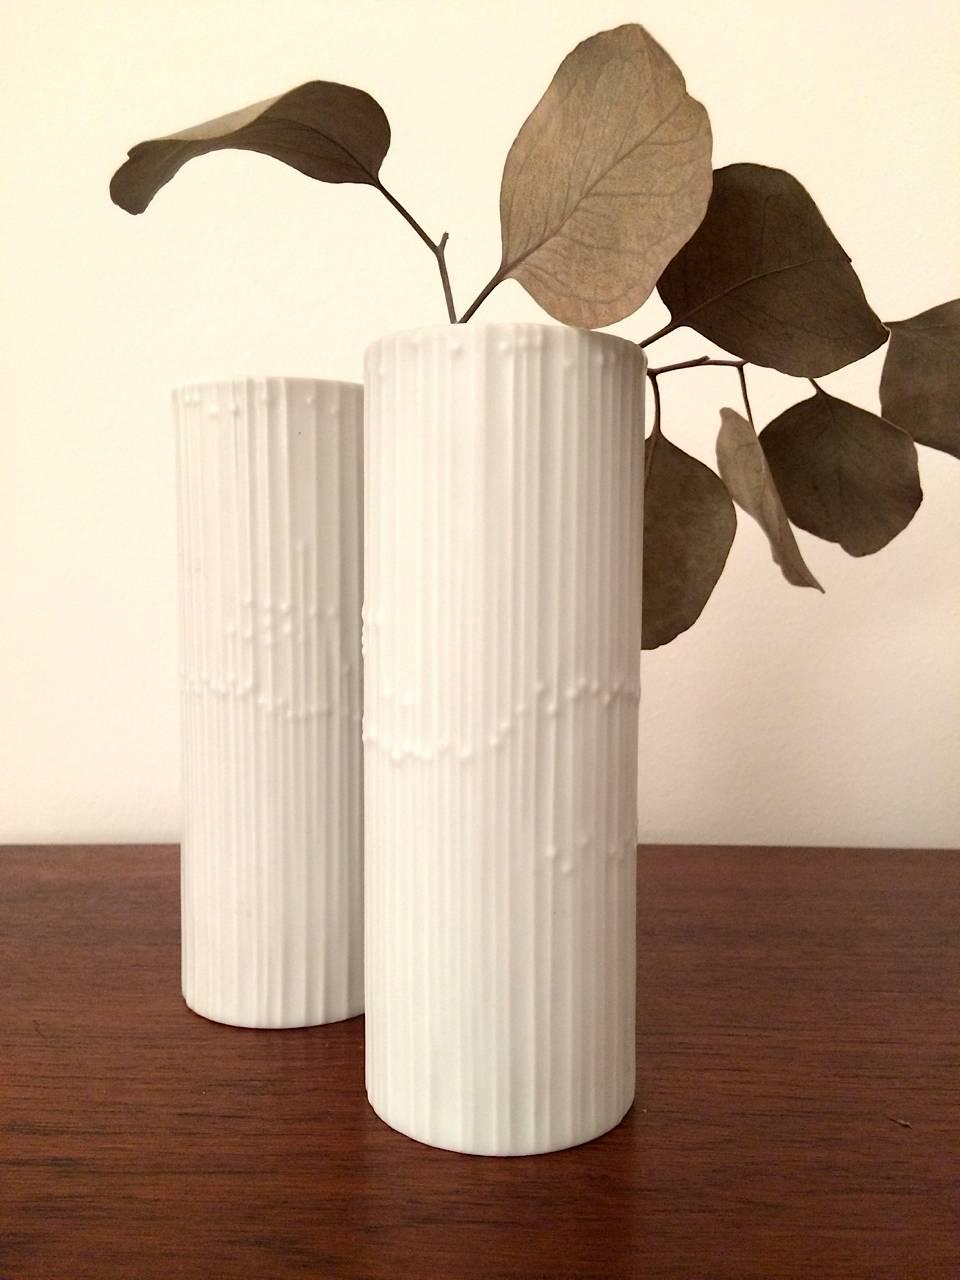 This porcelain vase was designed in the 1960s by Tapiola Wirkkala and produced by Rosenthal in Germany. It is made of fine porcelain and features an Op Art pattern and relief decor in Bamboo optic. Comes with golden stamp on the bottom.
        